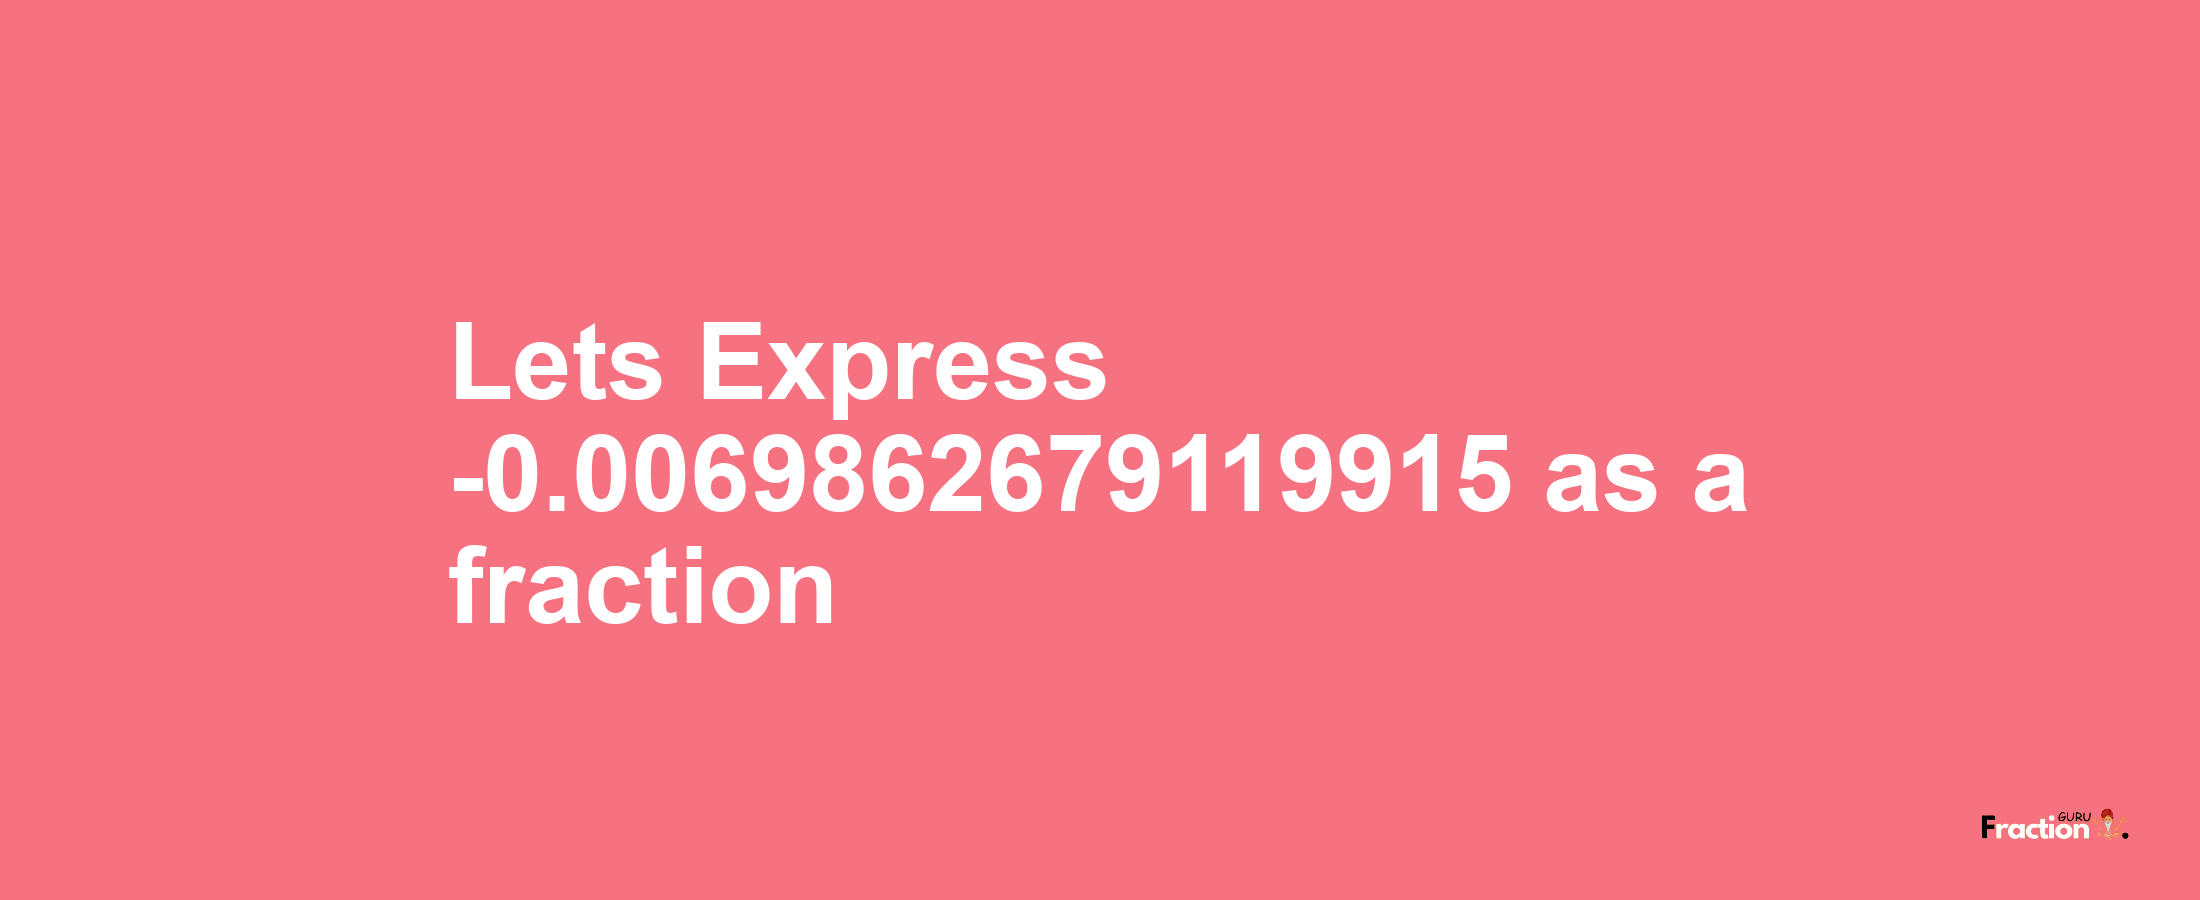 Lets Express -0.0069862679119915 as afraction